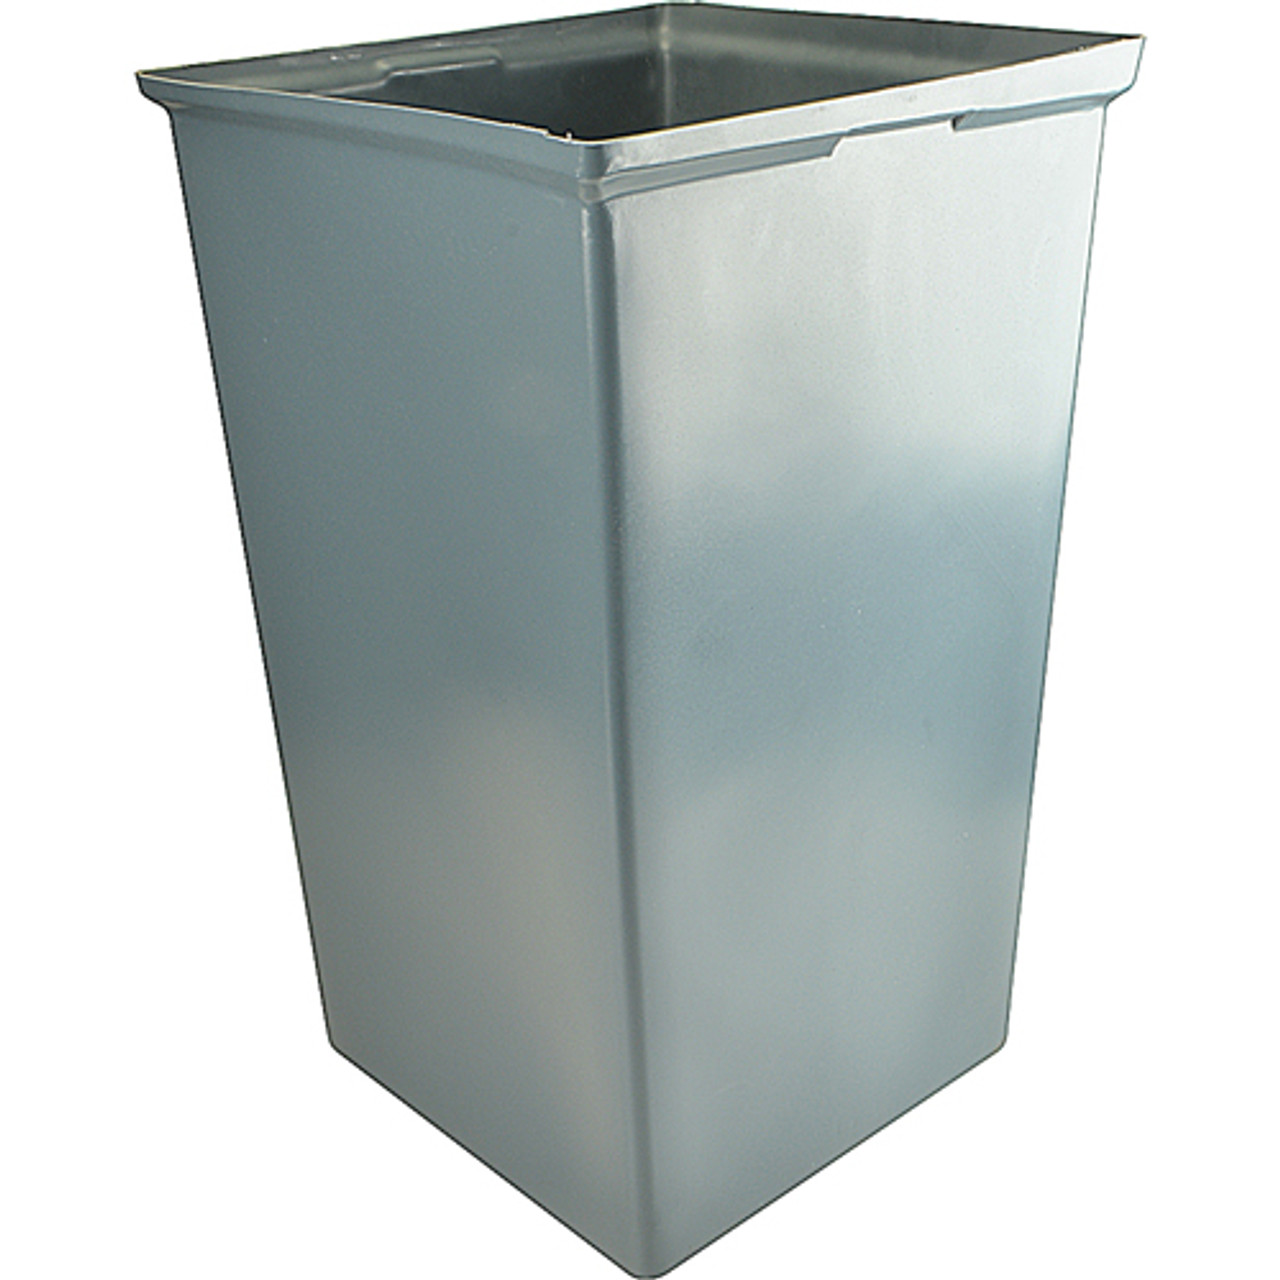 Trash Liner, Rigid, Grey , 35G, Trash Station - Replacement Part For Rubbermaid RBMDFG356700GRAY